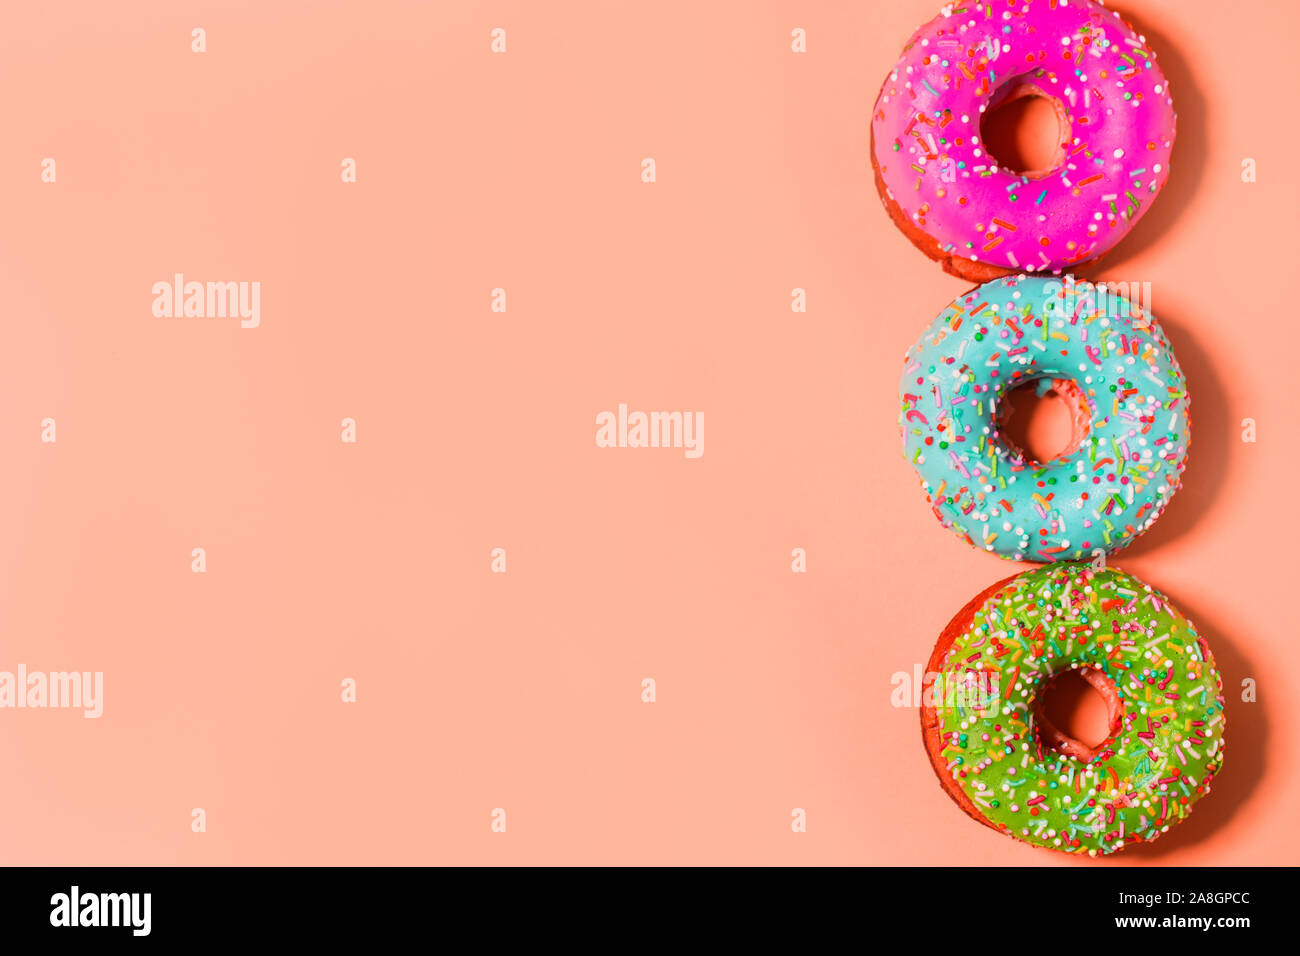 Closeup of three multicolored pink, blue and green glazed sweet donuts on coral background with copy space Stock Photo